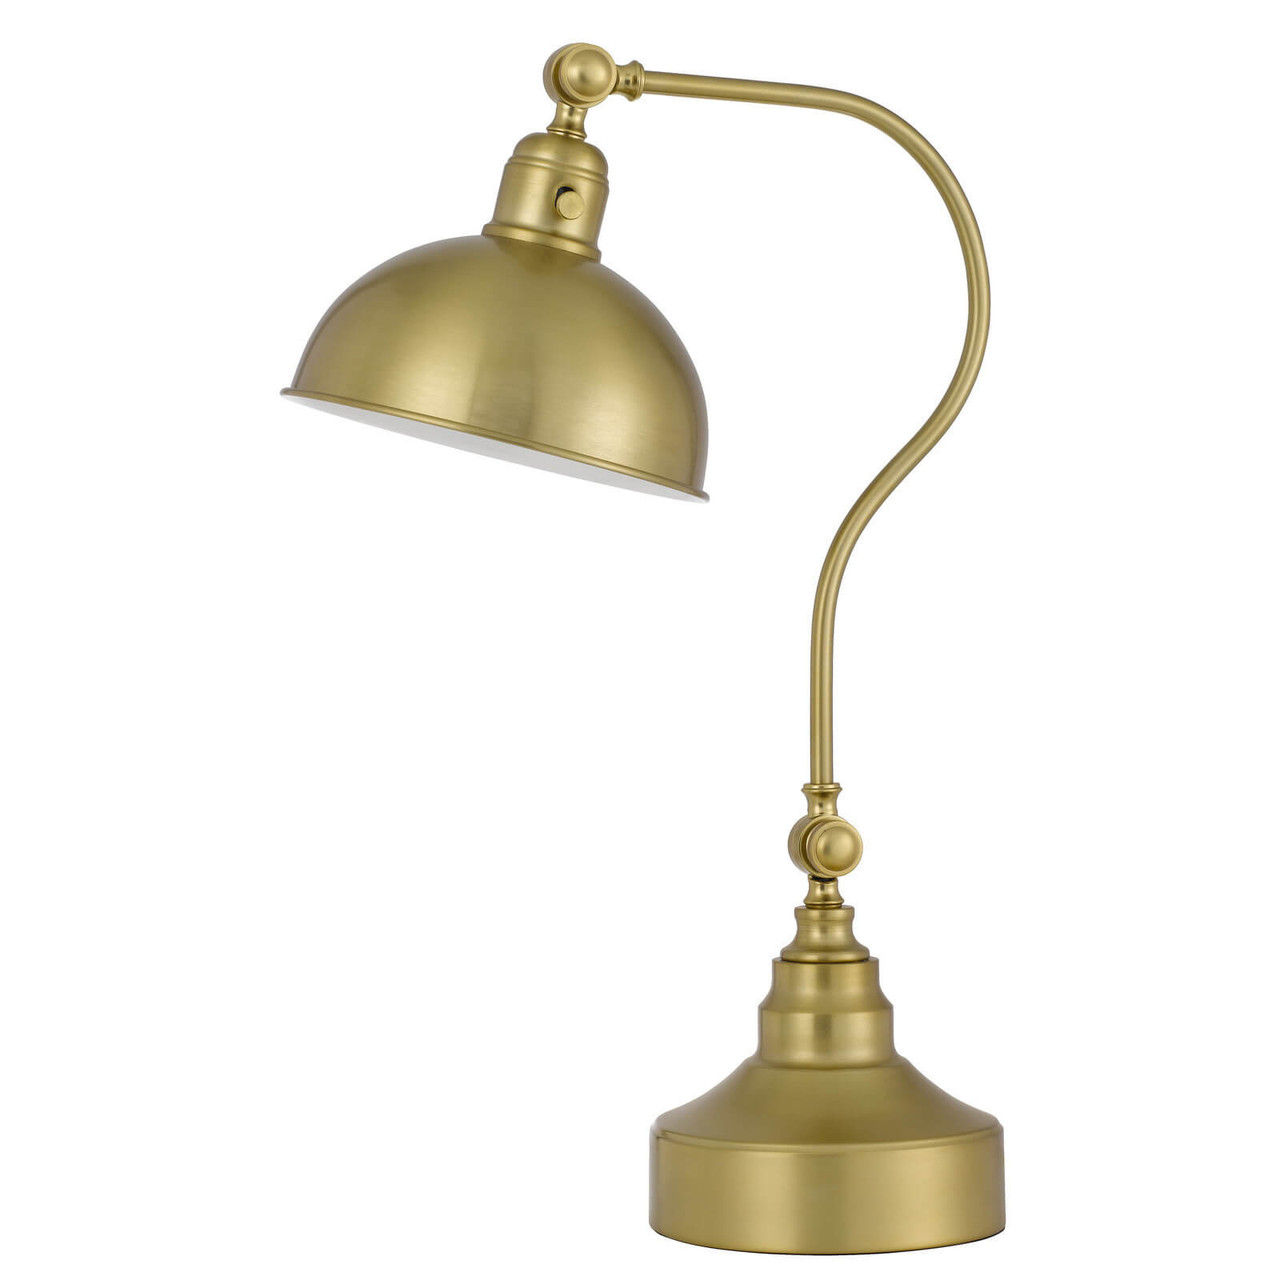 25" Antiqued Brass Metal Desk Table Lamp With Antiqued Brass Dome Shade - Chicken Pieces